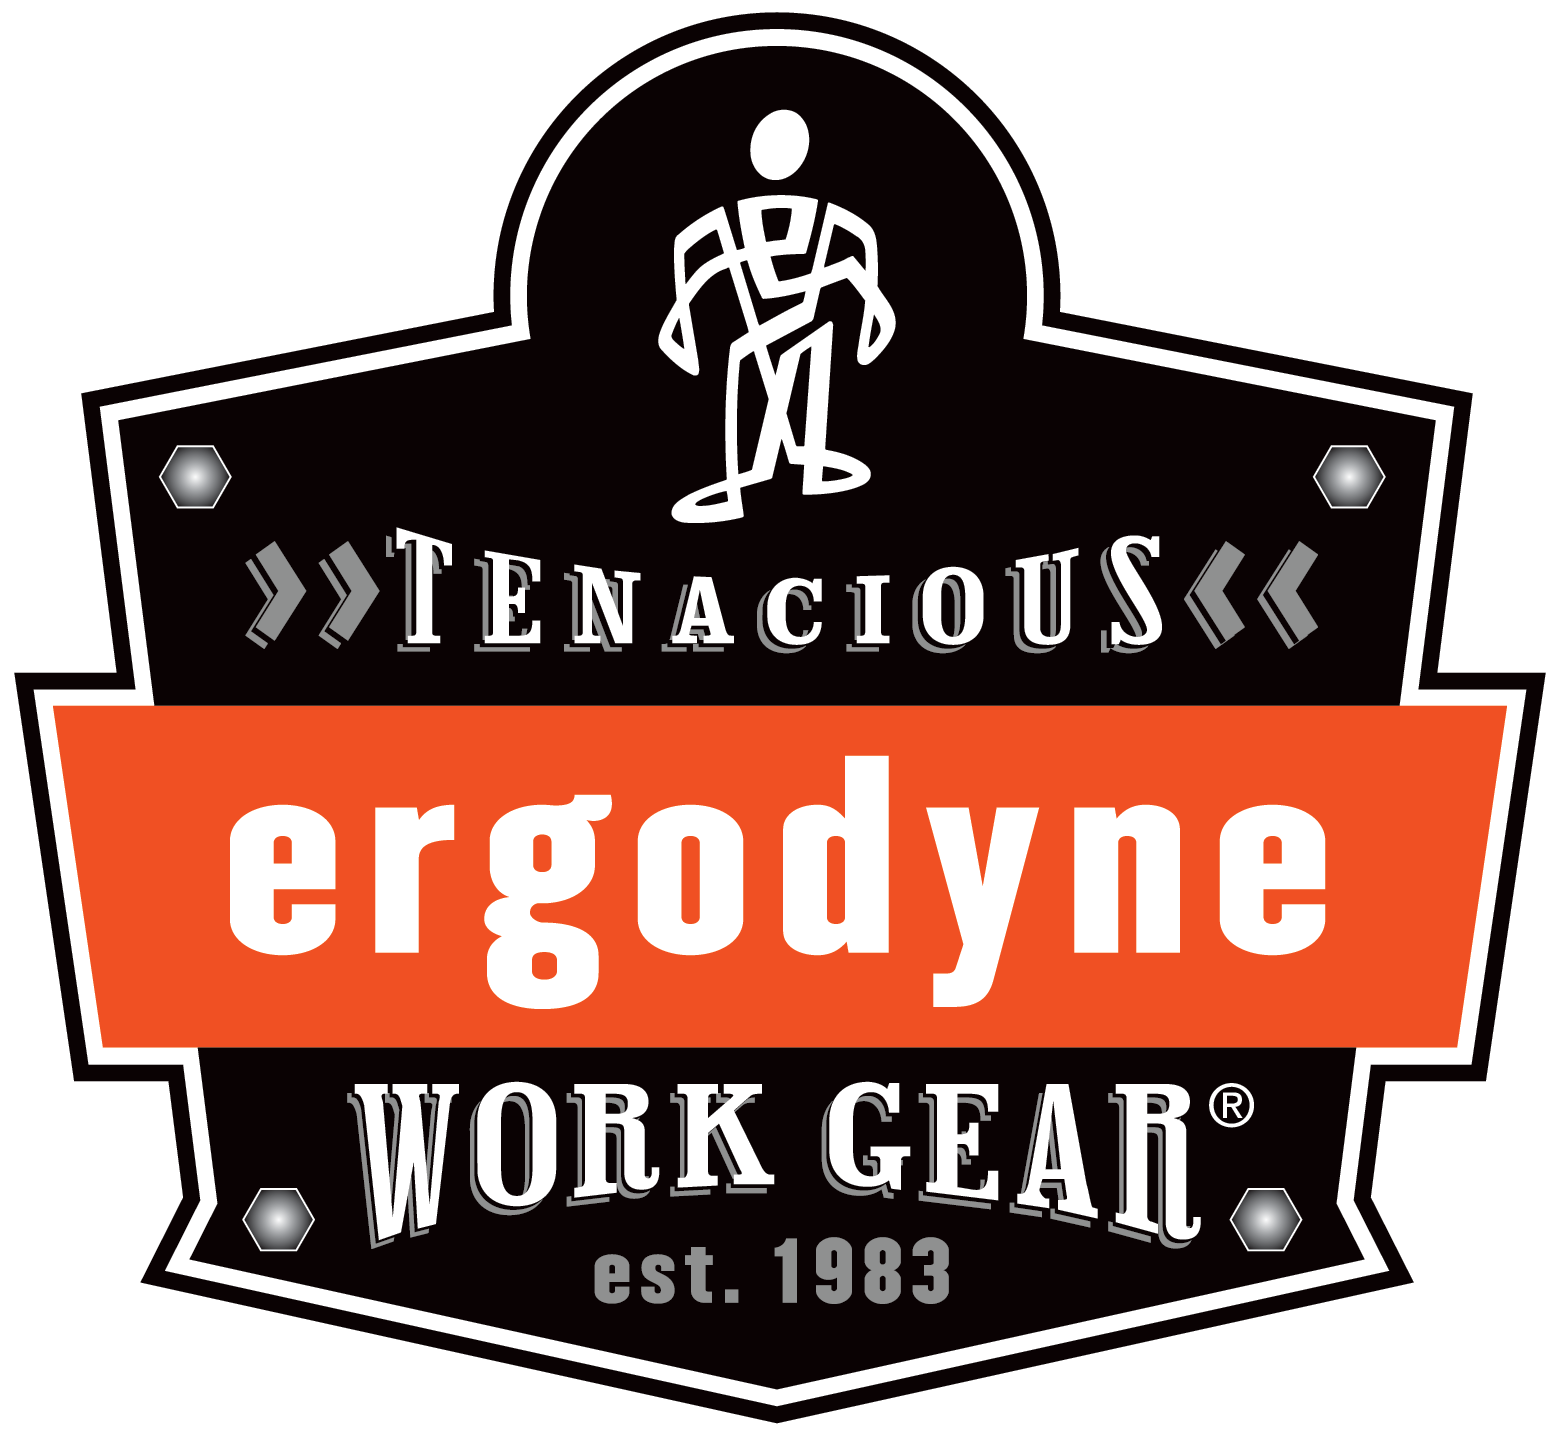 Since 1983, Ergodyne has pioneered the development of products that Make The Workplace A Betterplace™.

What started with just one product has grown into a line of top flight, battle-tested Tenacious Work Gear®; all precision crafted to provide protection, promote prevention and manage the elements for workers on job sites the world over.